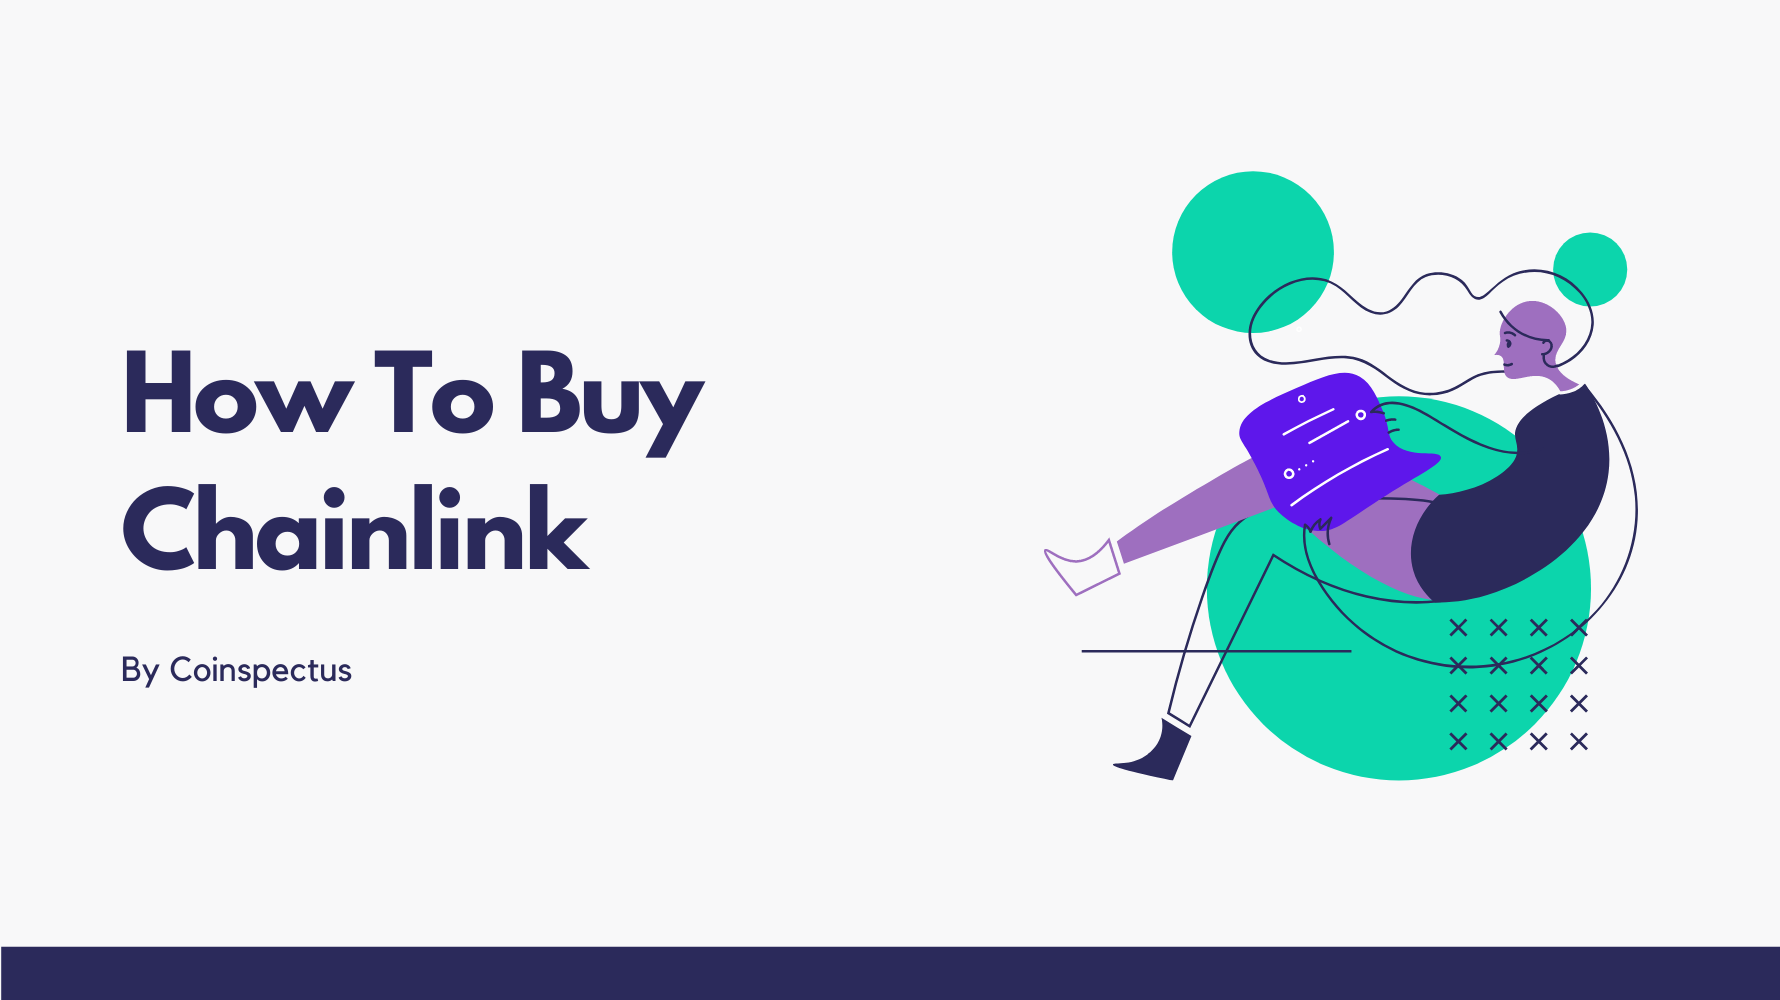 5 Best Exchange To Buy Chainlink Cryptocurrency | Coinspectus